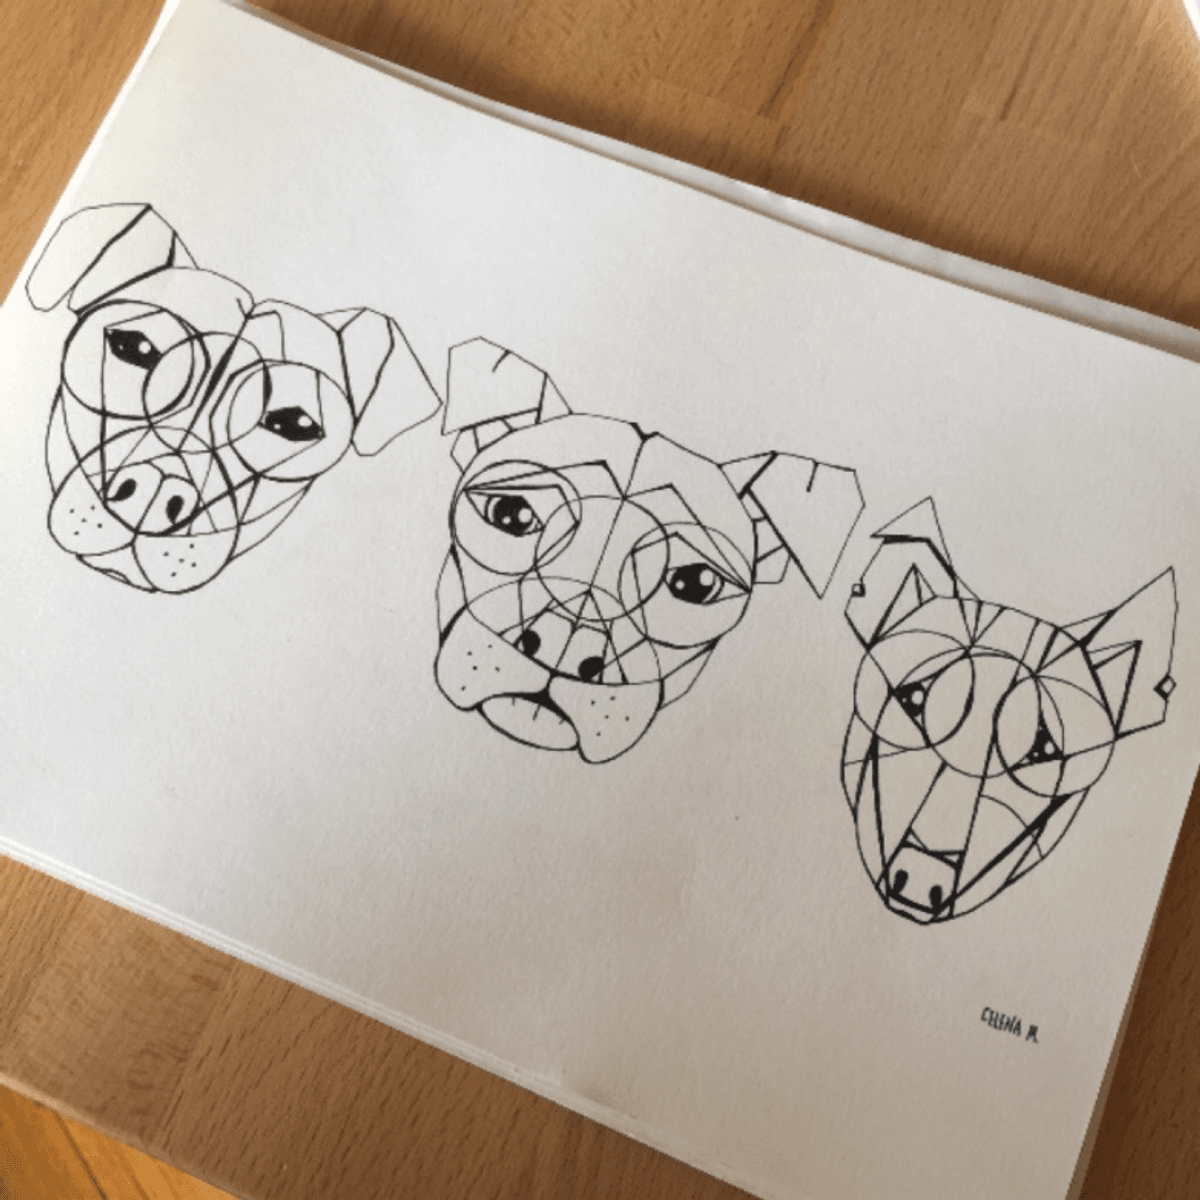 Tattoo uploaded by Celena Matchington • Just a little #stylized #line # drawing of my #staffy #pitbull and #bullterrier #tattooidea #geo #dogs  #puppytattoo #geometric #linework #outline #stencil • Tattoodo